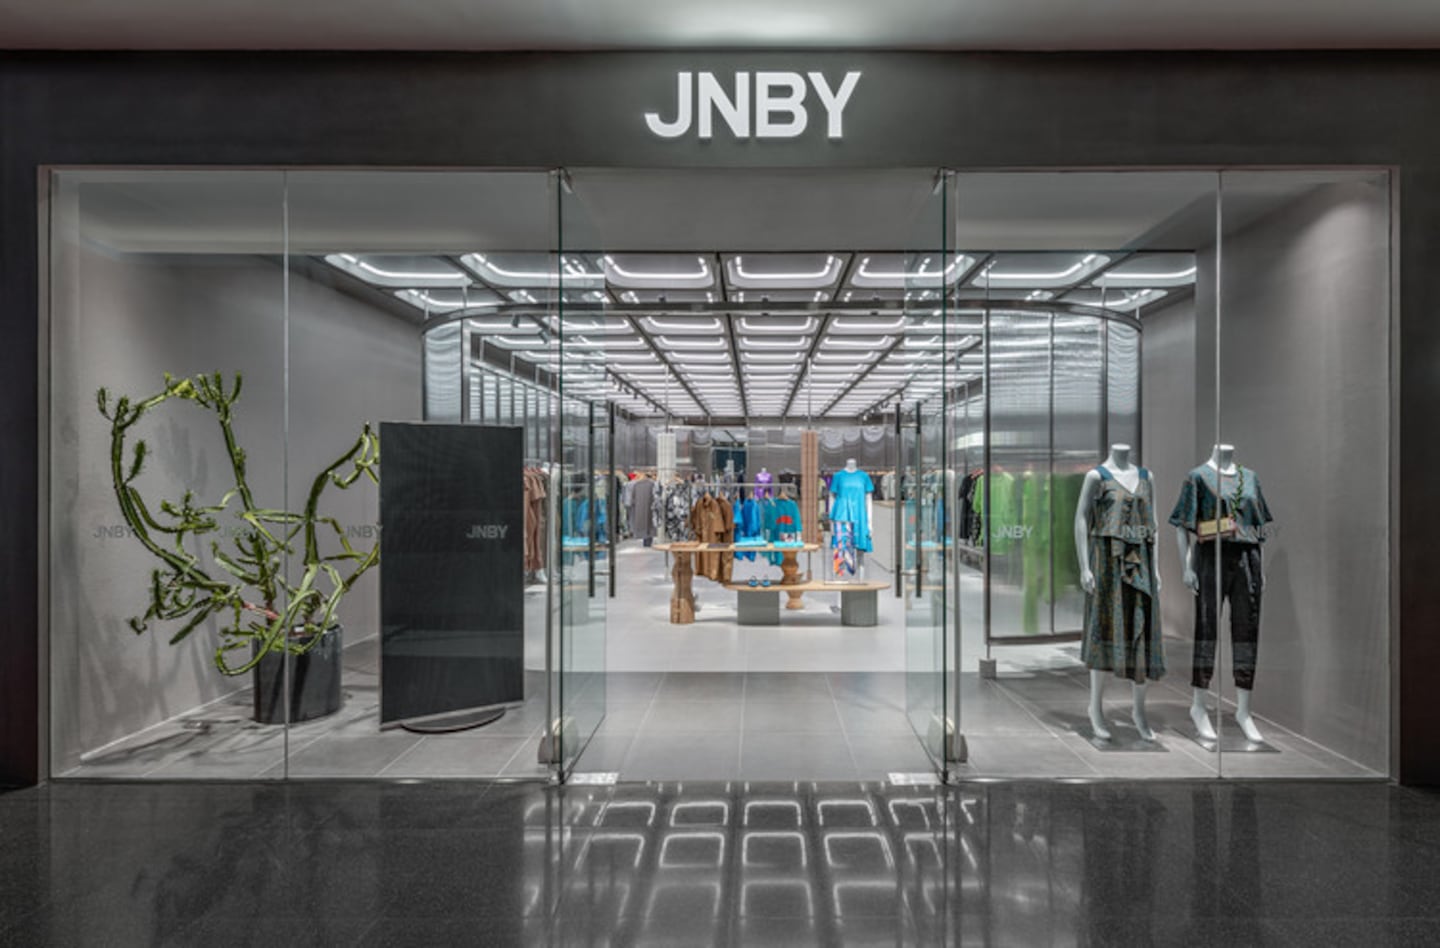 A JNBY store. JNBY